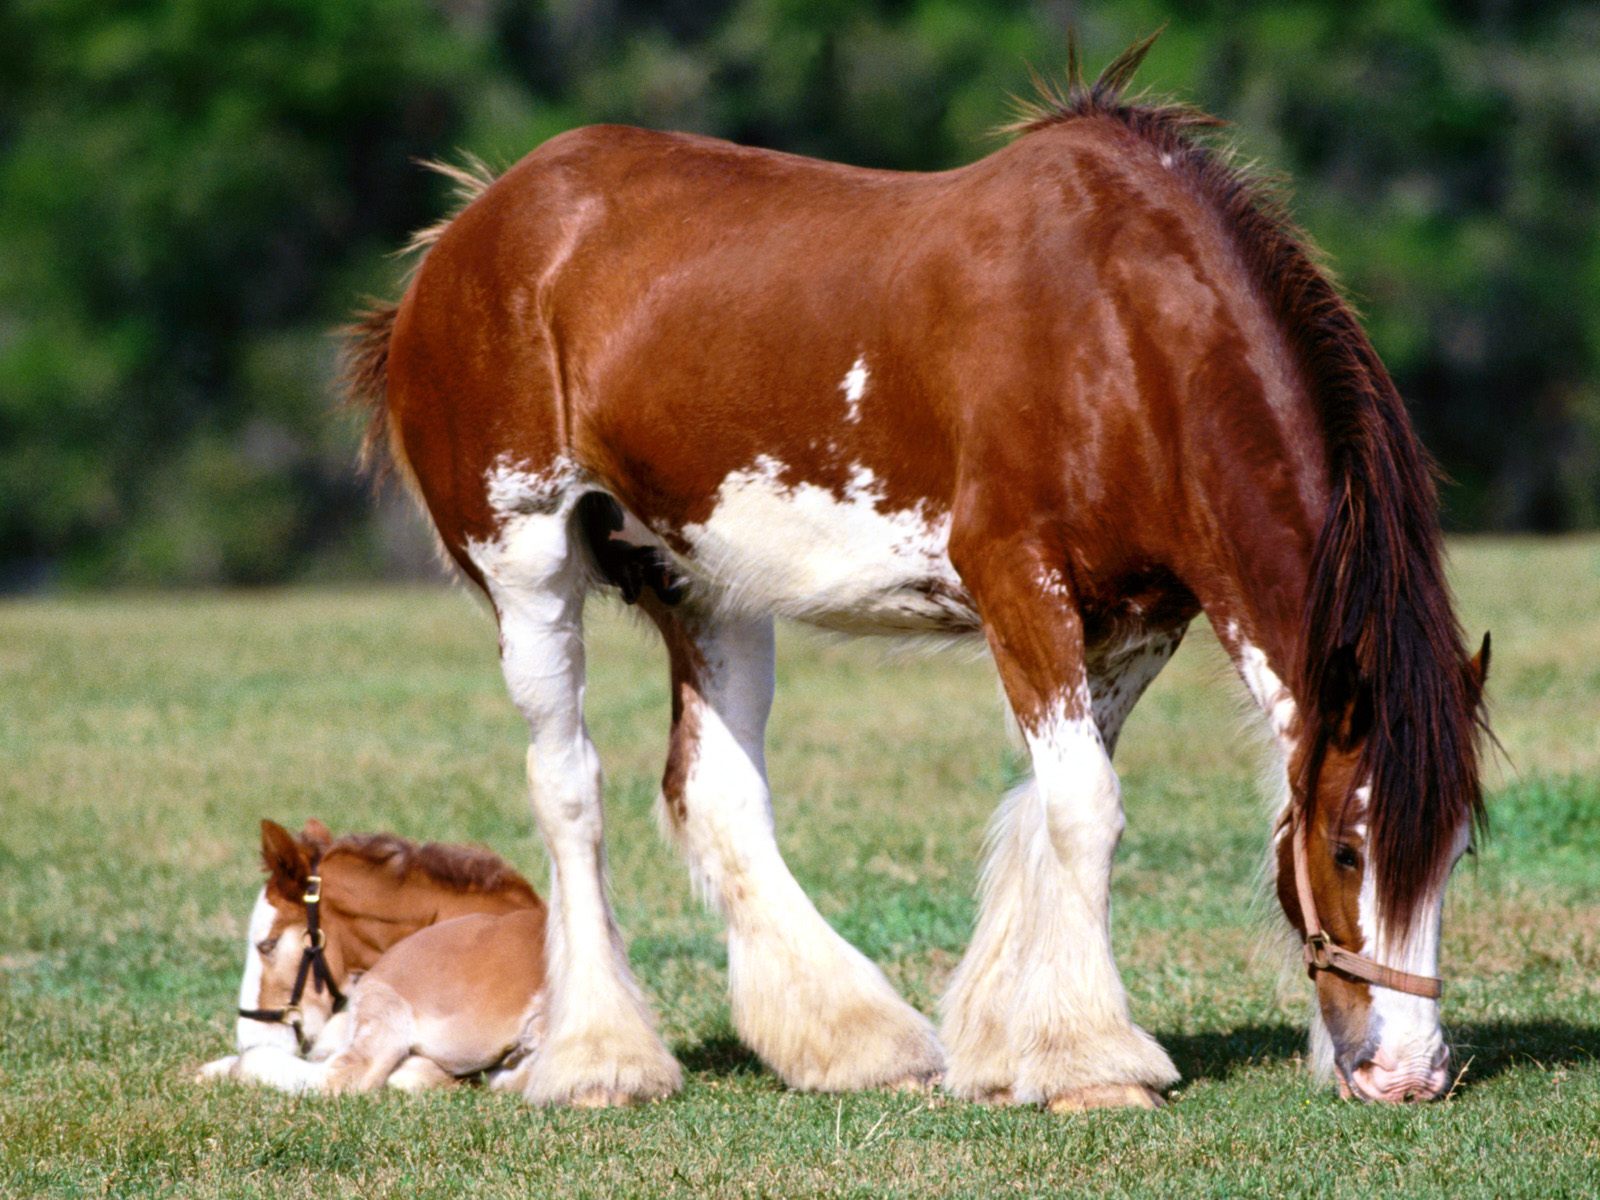 High Definition Wallpapers Horse Pictures - Clydesdale Mare And Foal - HD Wallpaper 